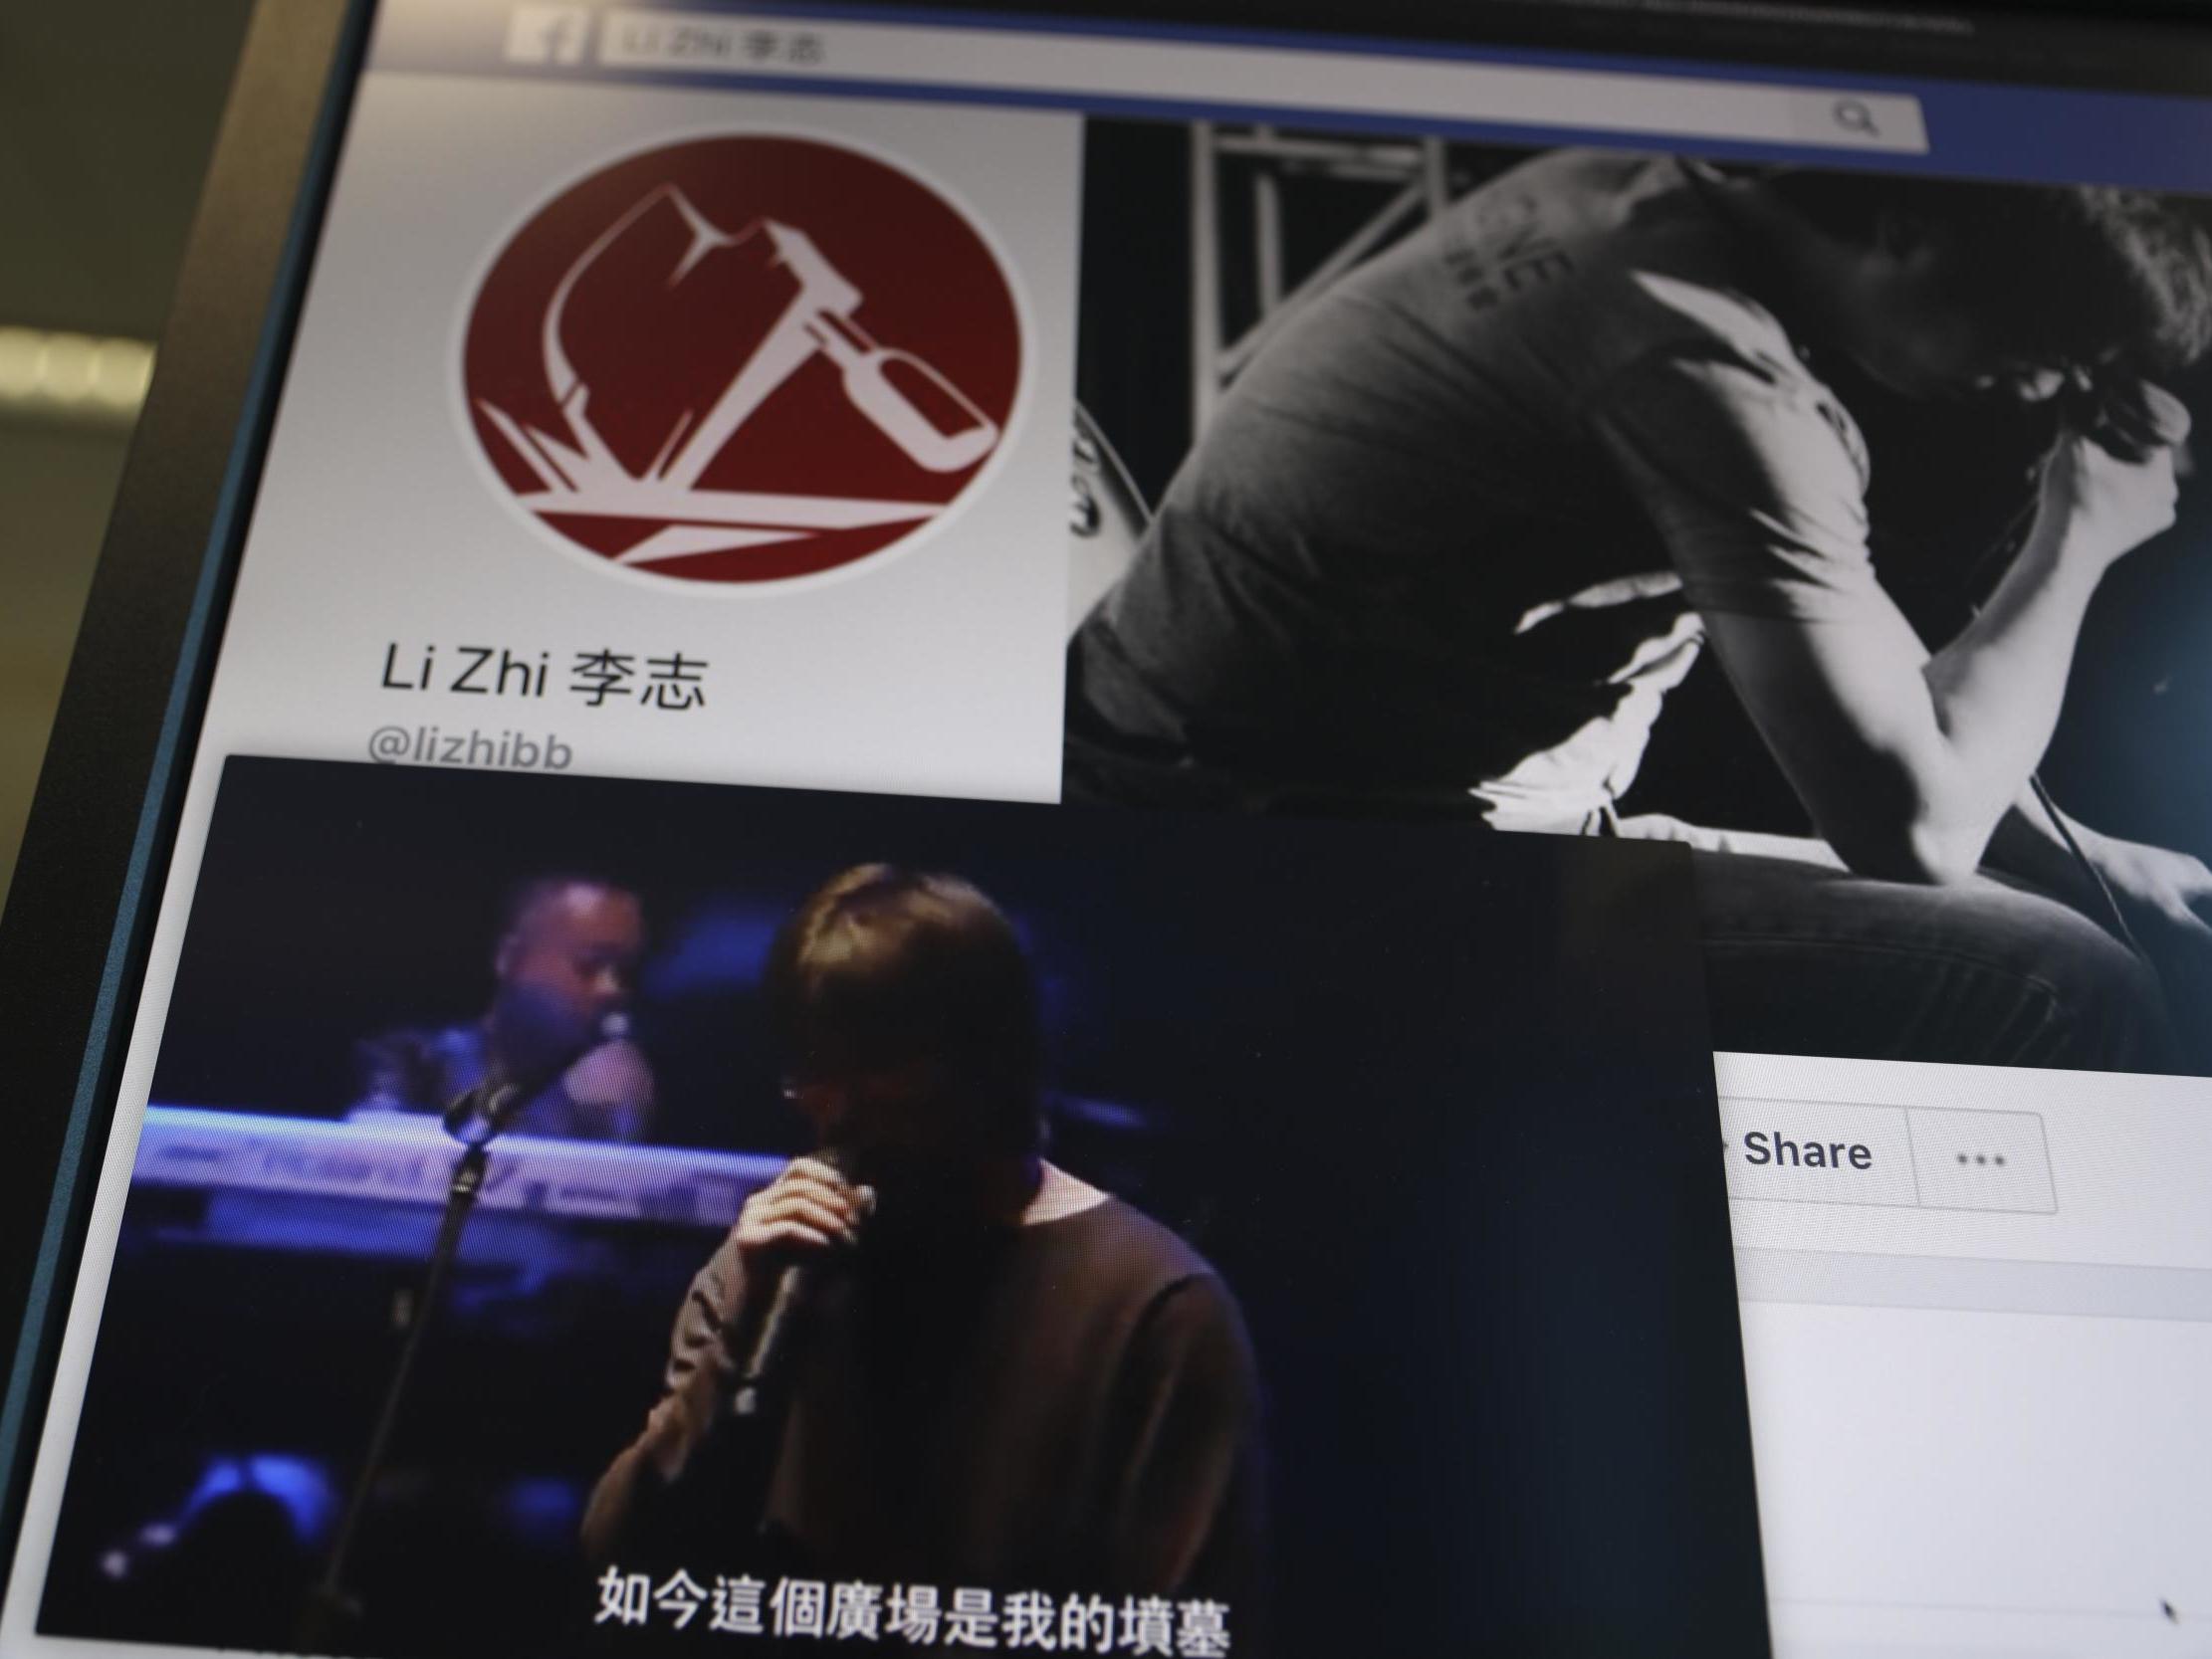 Popular rock musician Li Zhi, who sang about taboo Tiananmen Square massacre, goes missing ahead of anniversary